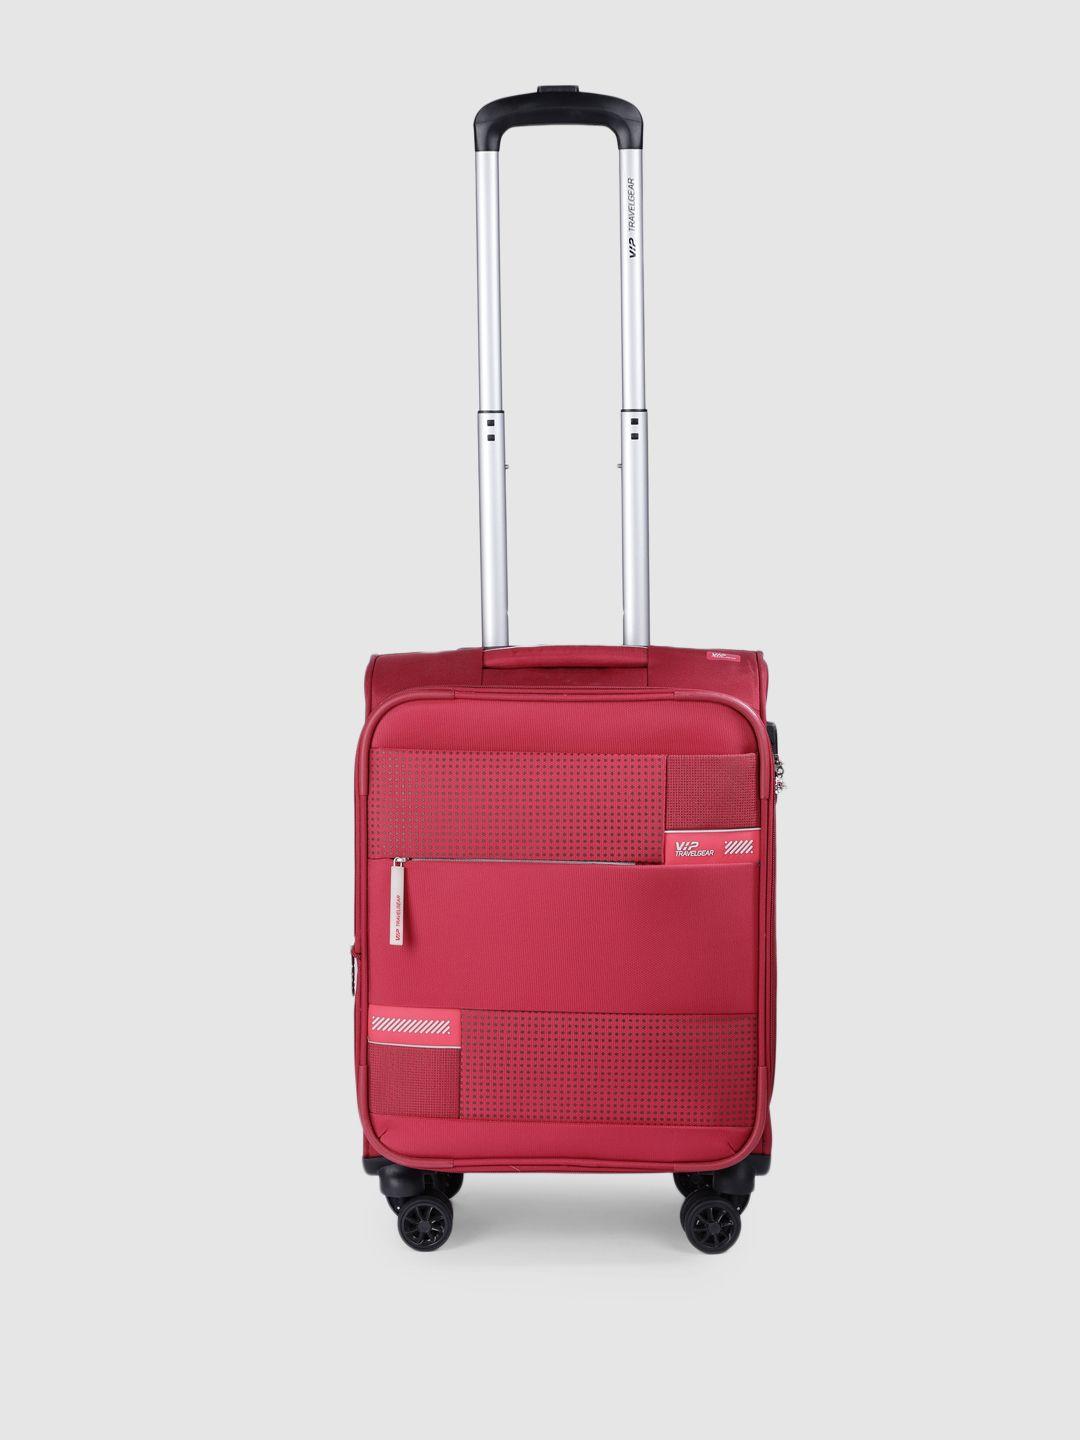 vip zion nxt cabin trolley suitcase